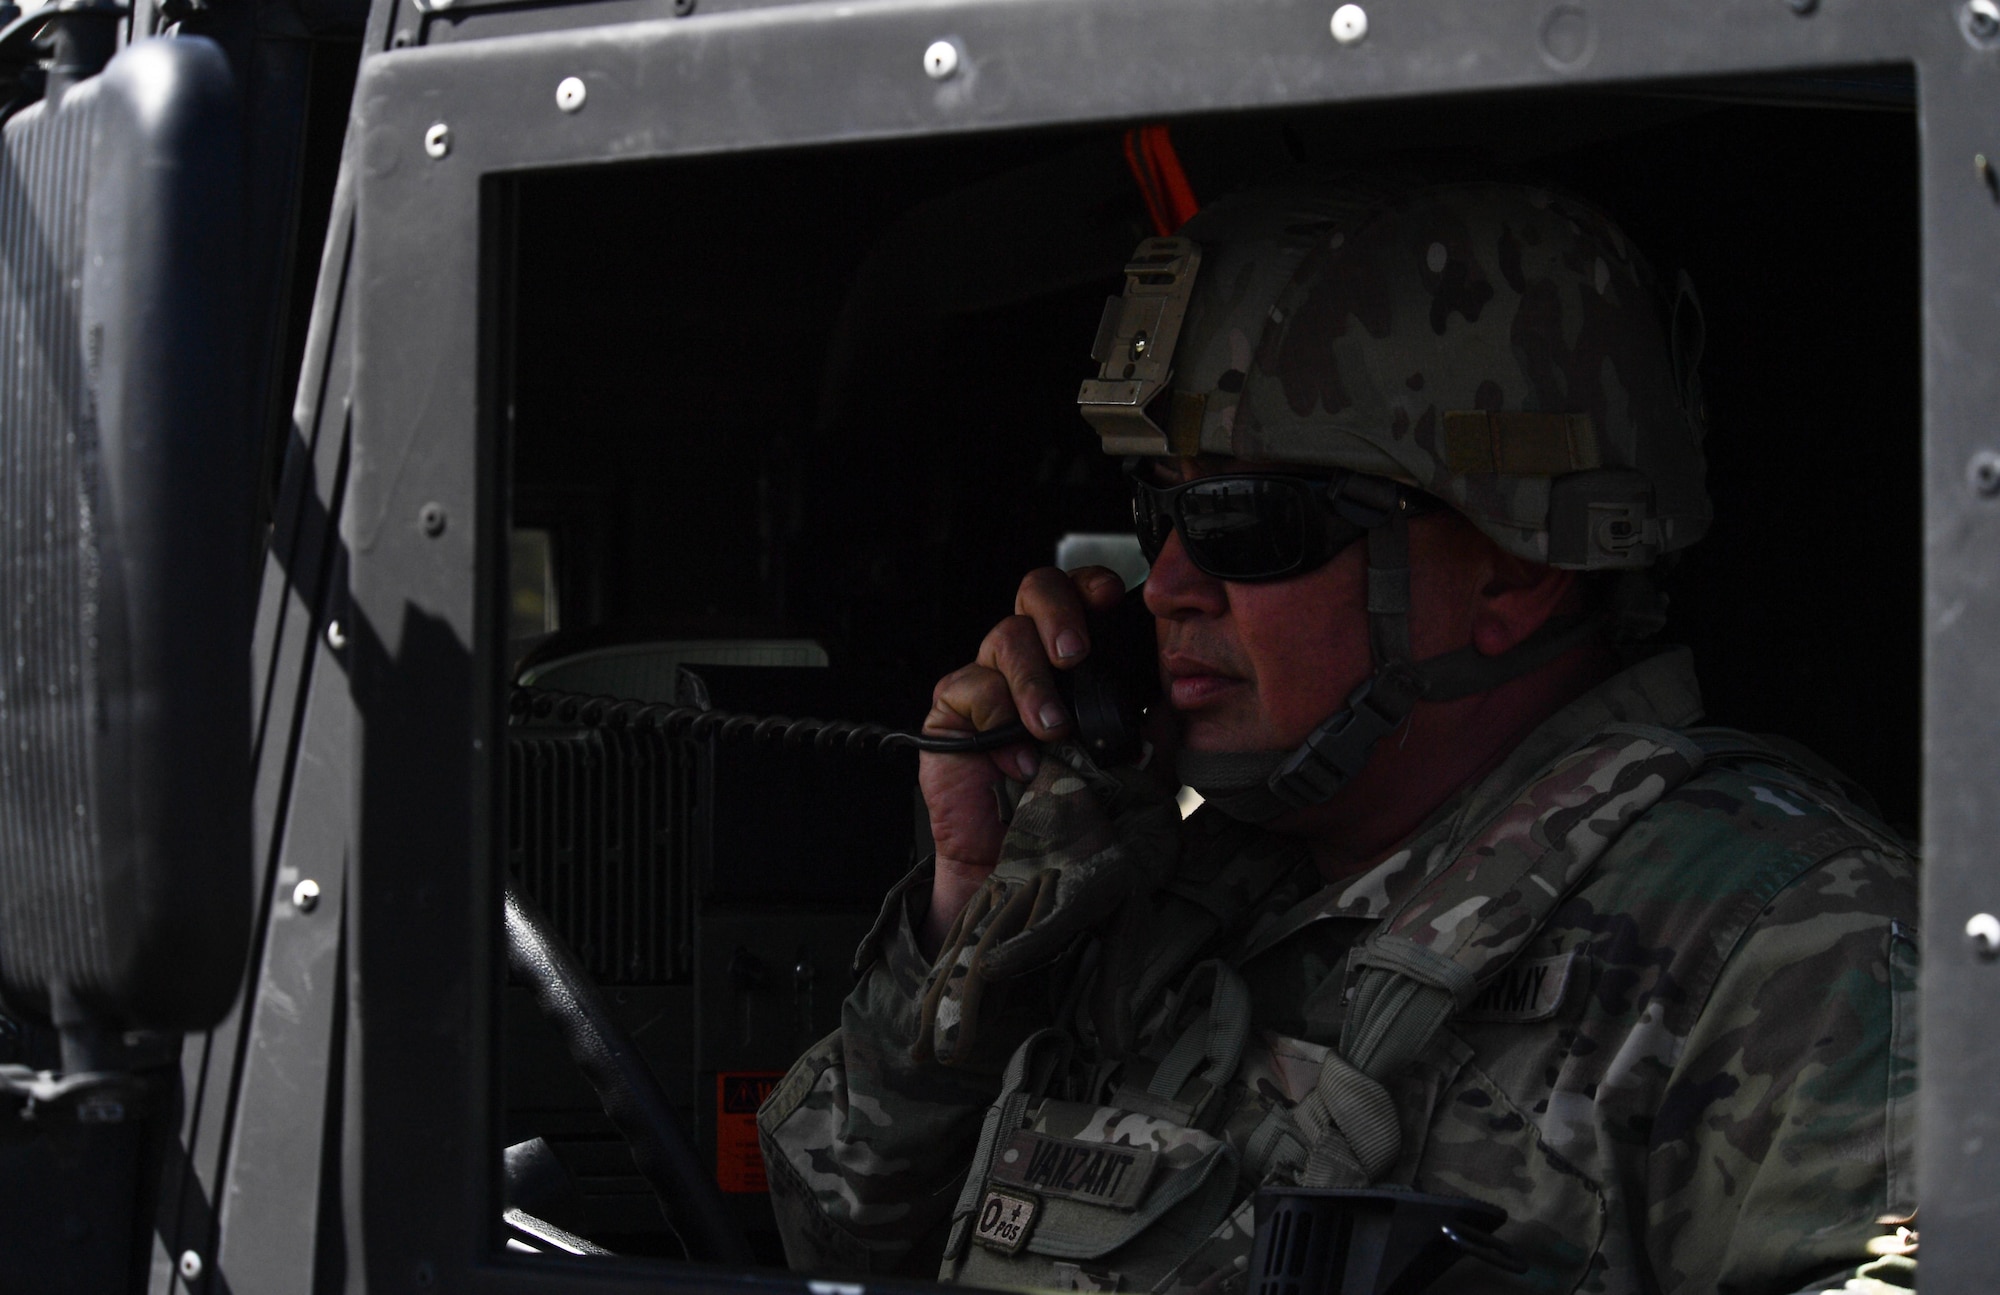 U.S Army National Guard Master Sgt. Samuel Vanzant, 3rd Battalion, 157th Field Artillery operations noncommissioned officer, calls in three good missile launches to U.S. and NATO joint terminal attack controllers during exercise Saber Strike 17 at Adazi Military Base, Latvia, June 9, 2017. The U.S. and NATO JTACs worked alongside each other throughout the exercise. Participation in multinational exercises such as Saber Strike enhances professional relationships and improves overall coordination with allies and with partner militaries during times of crisis. (U.S Air Force photo by Senior Airman Tryphena Mayhugh)